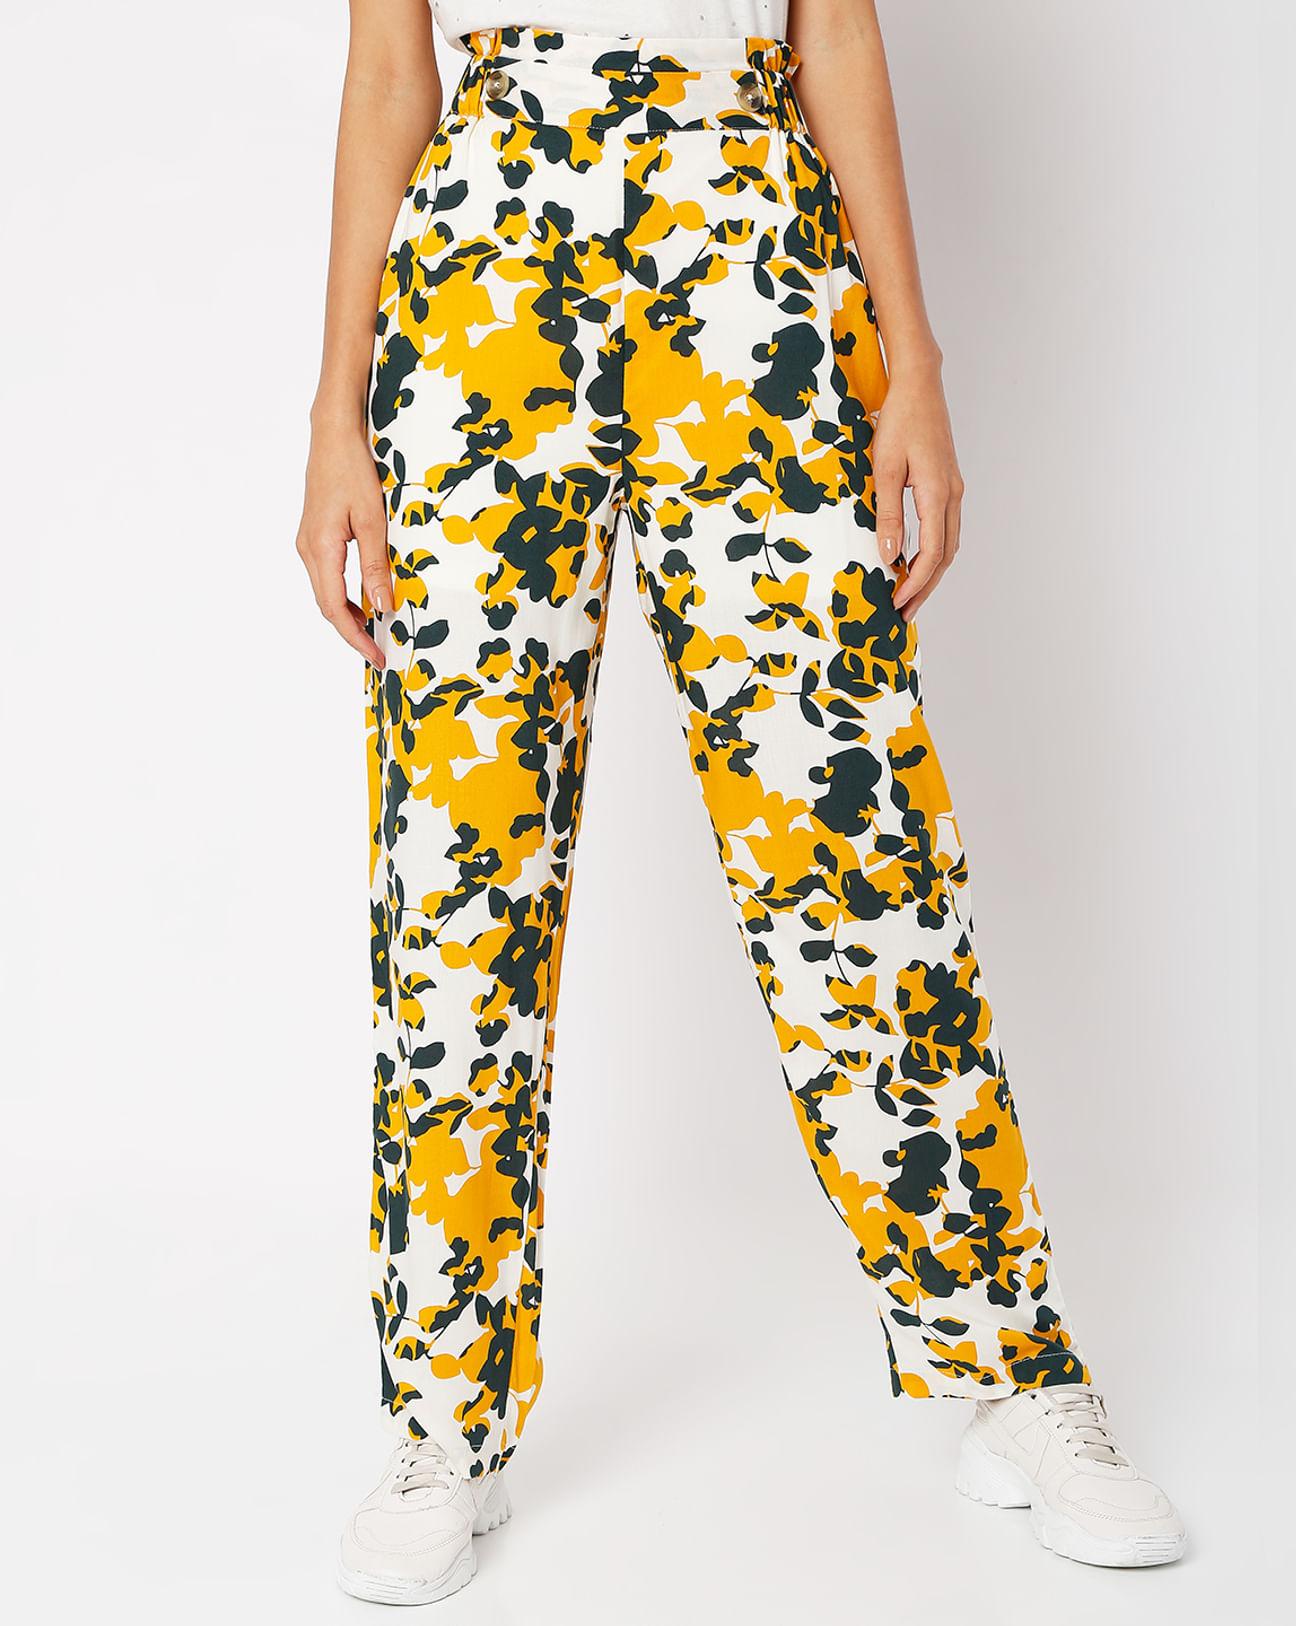 yellow high rise floral pants